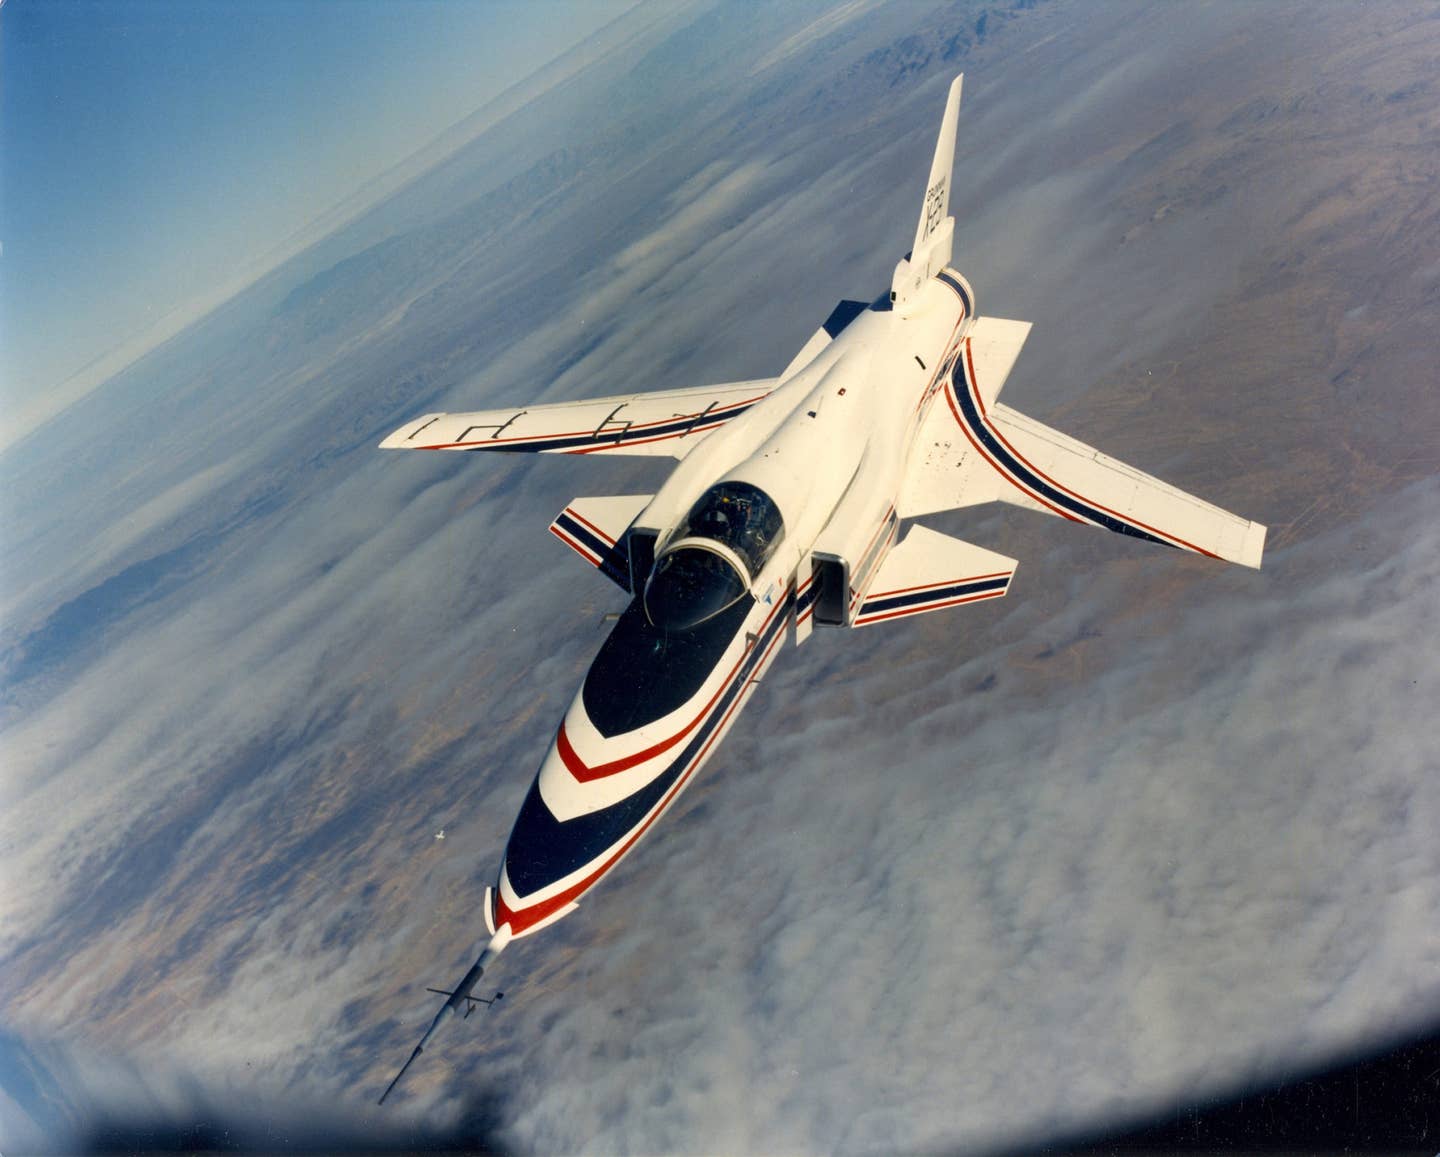 The X-29 in flight, with a good look at the front. (USAF photo)